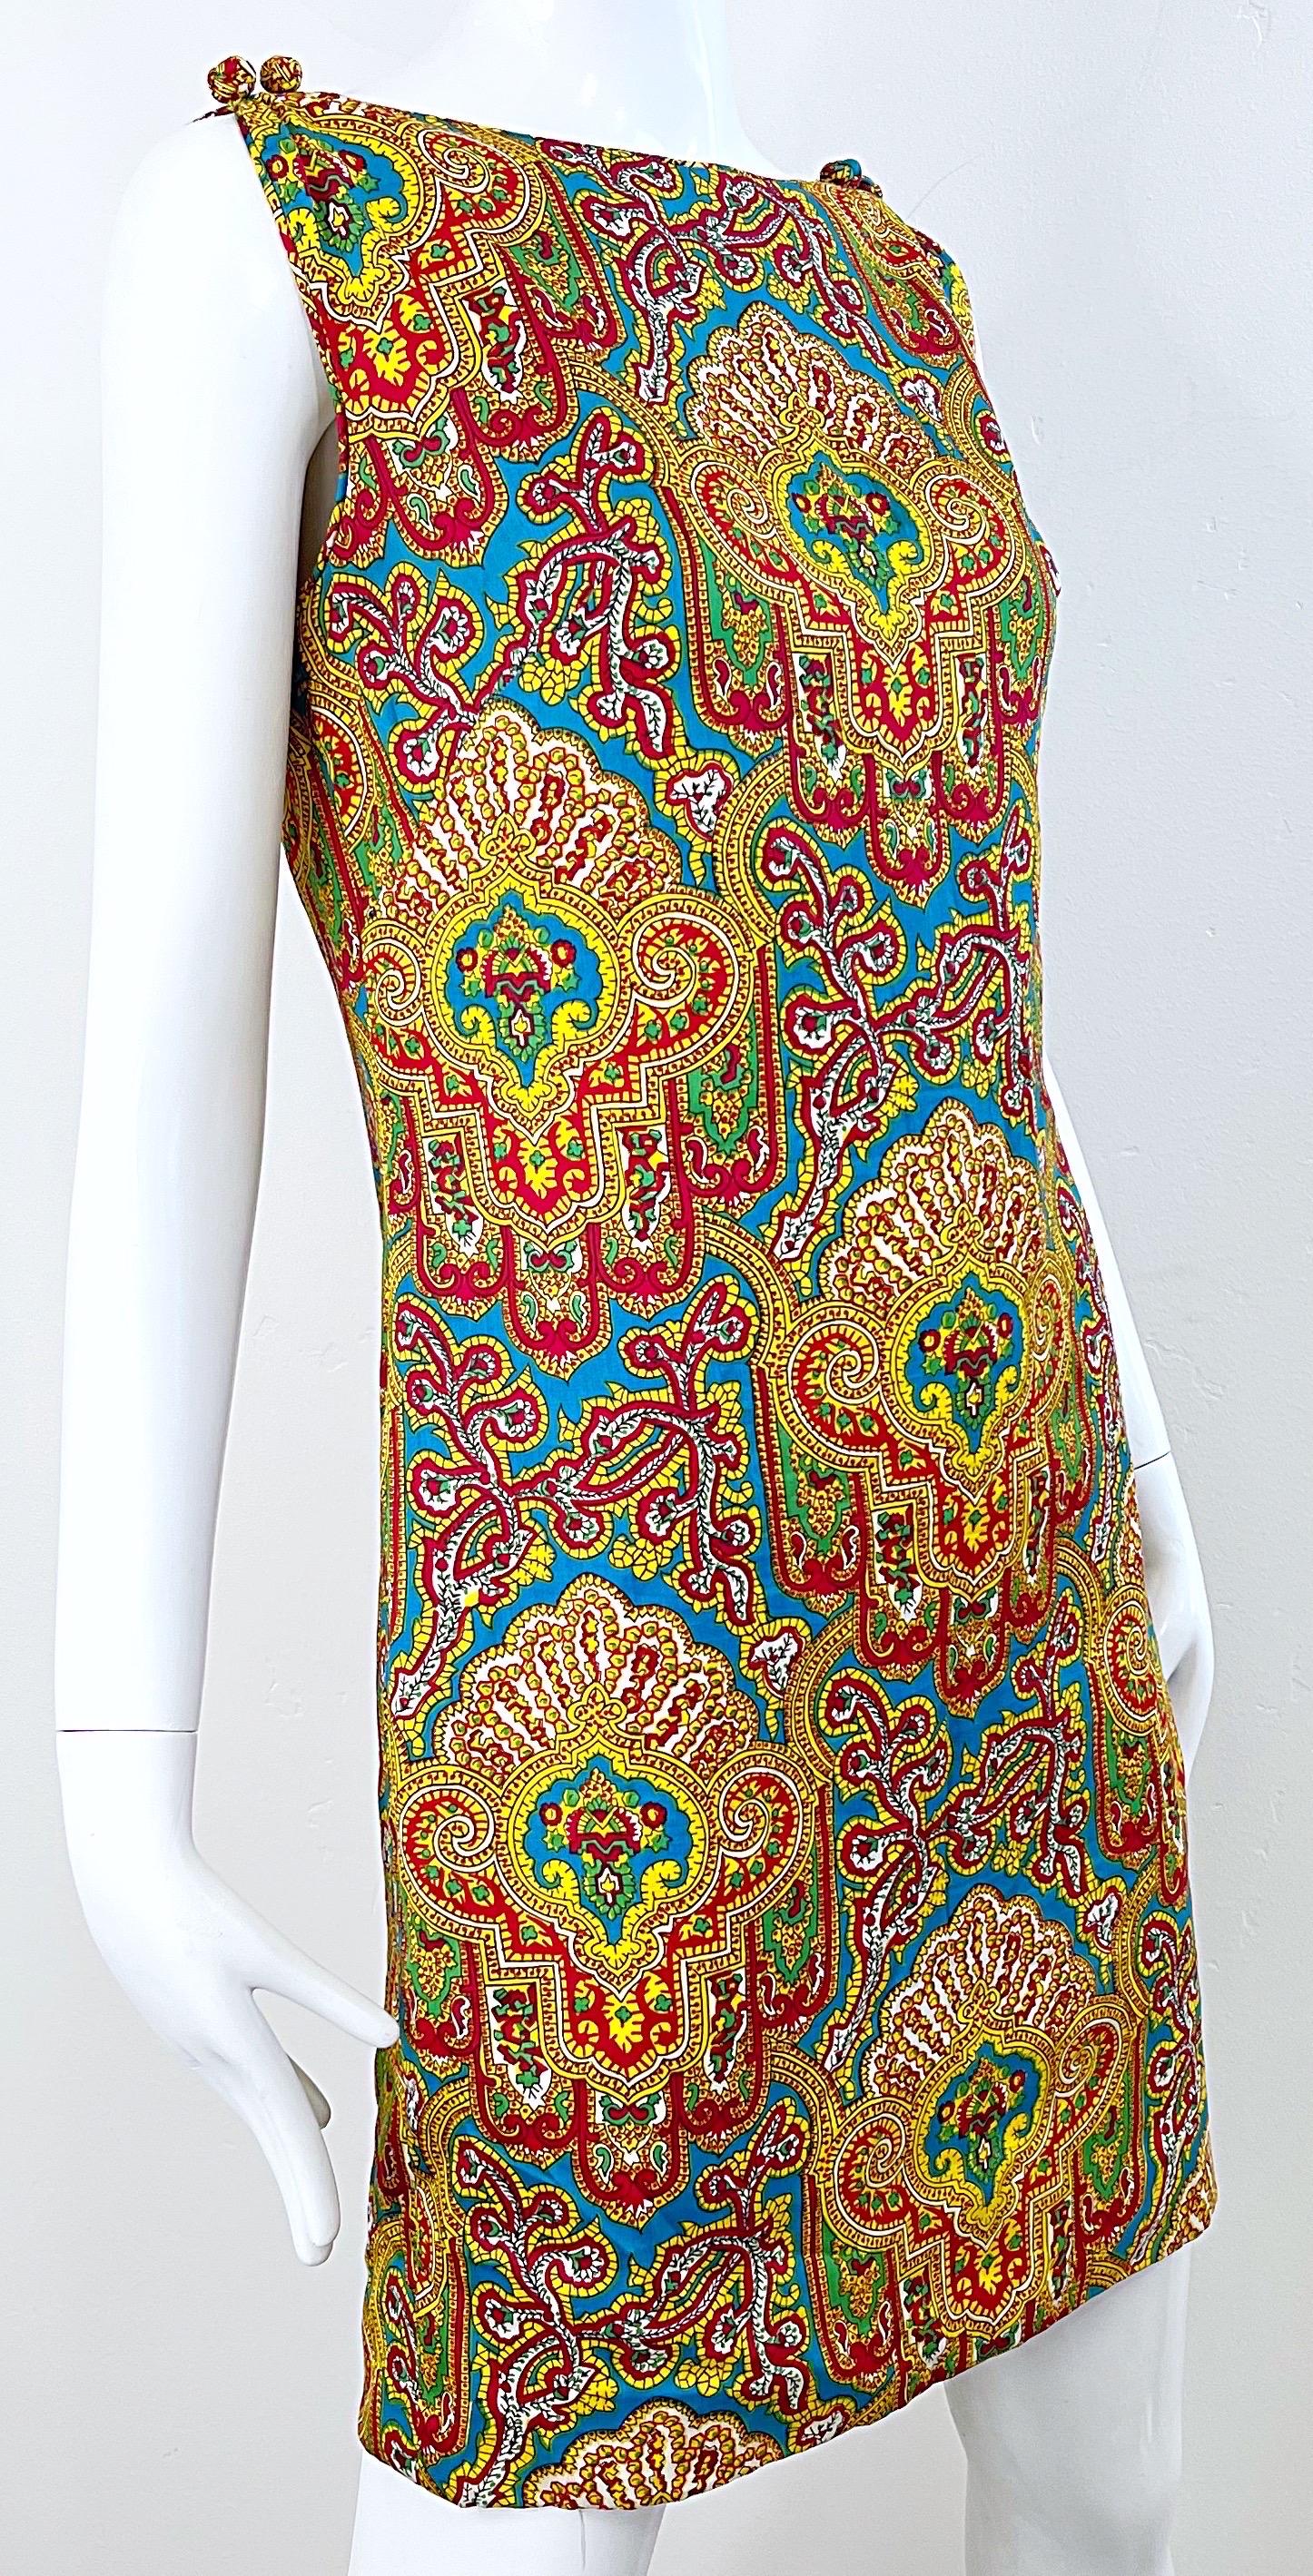 1960s Dynasty Paisley Bright Colorful Silk Vintage 60s Sleeveless Shift Dress For Sale 3